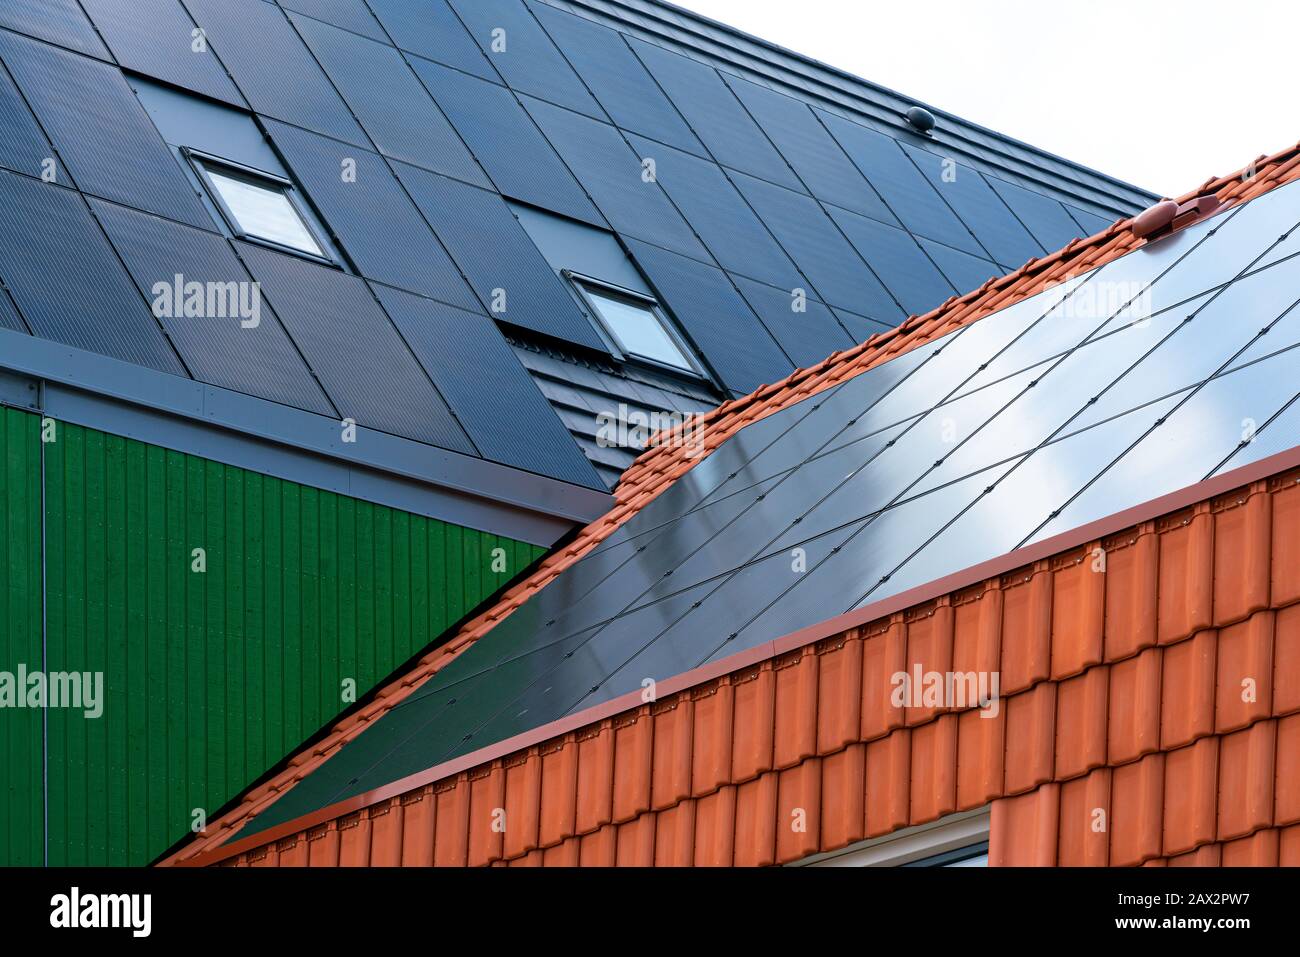 Solar collectors on a wood and roof shingle clad house Stock Photo